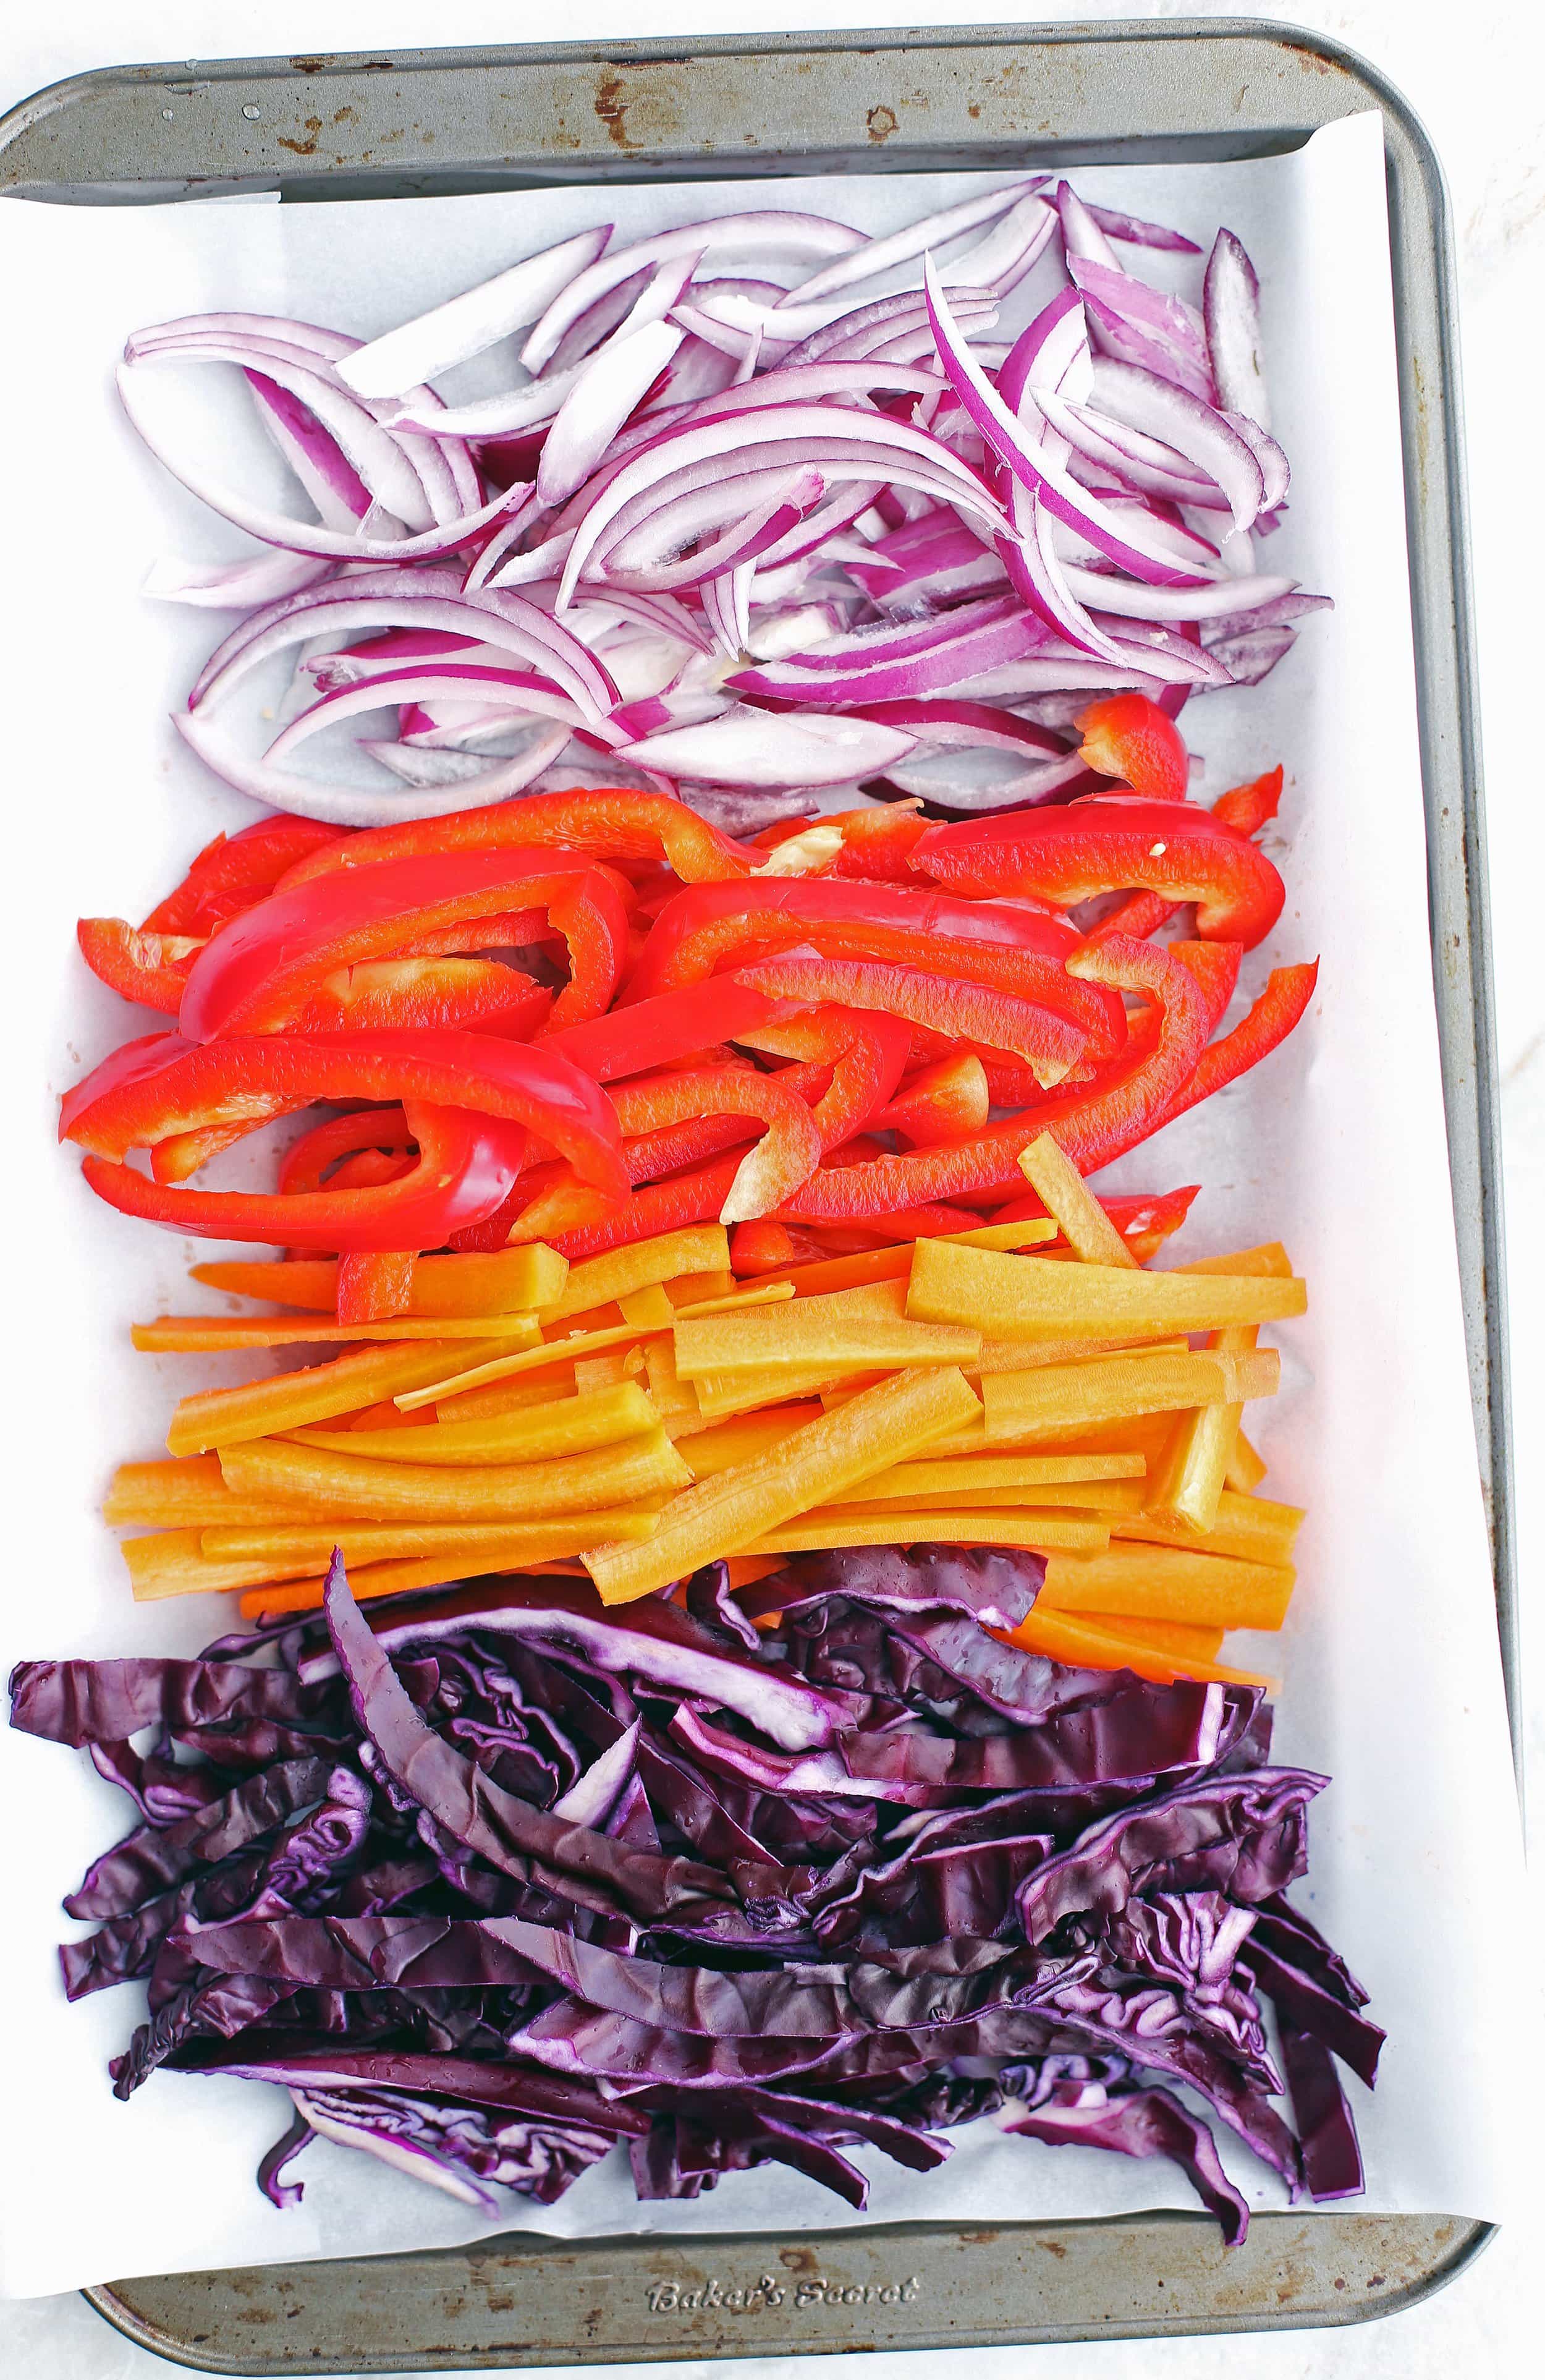 Sliced red cabbage, carrots, red bell pepper, and red onion on a baking sheet.